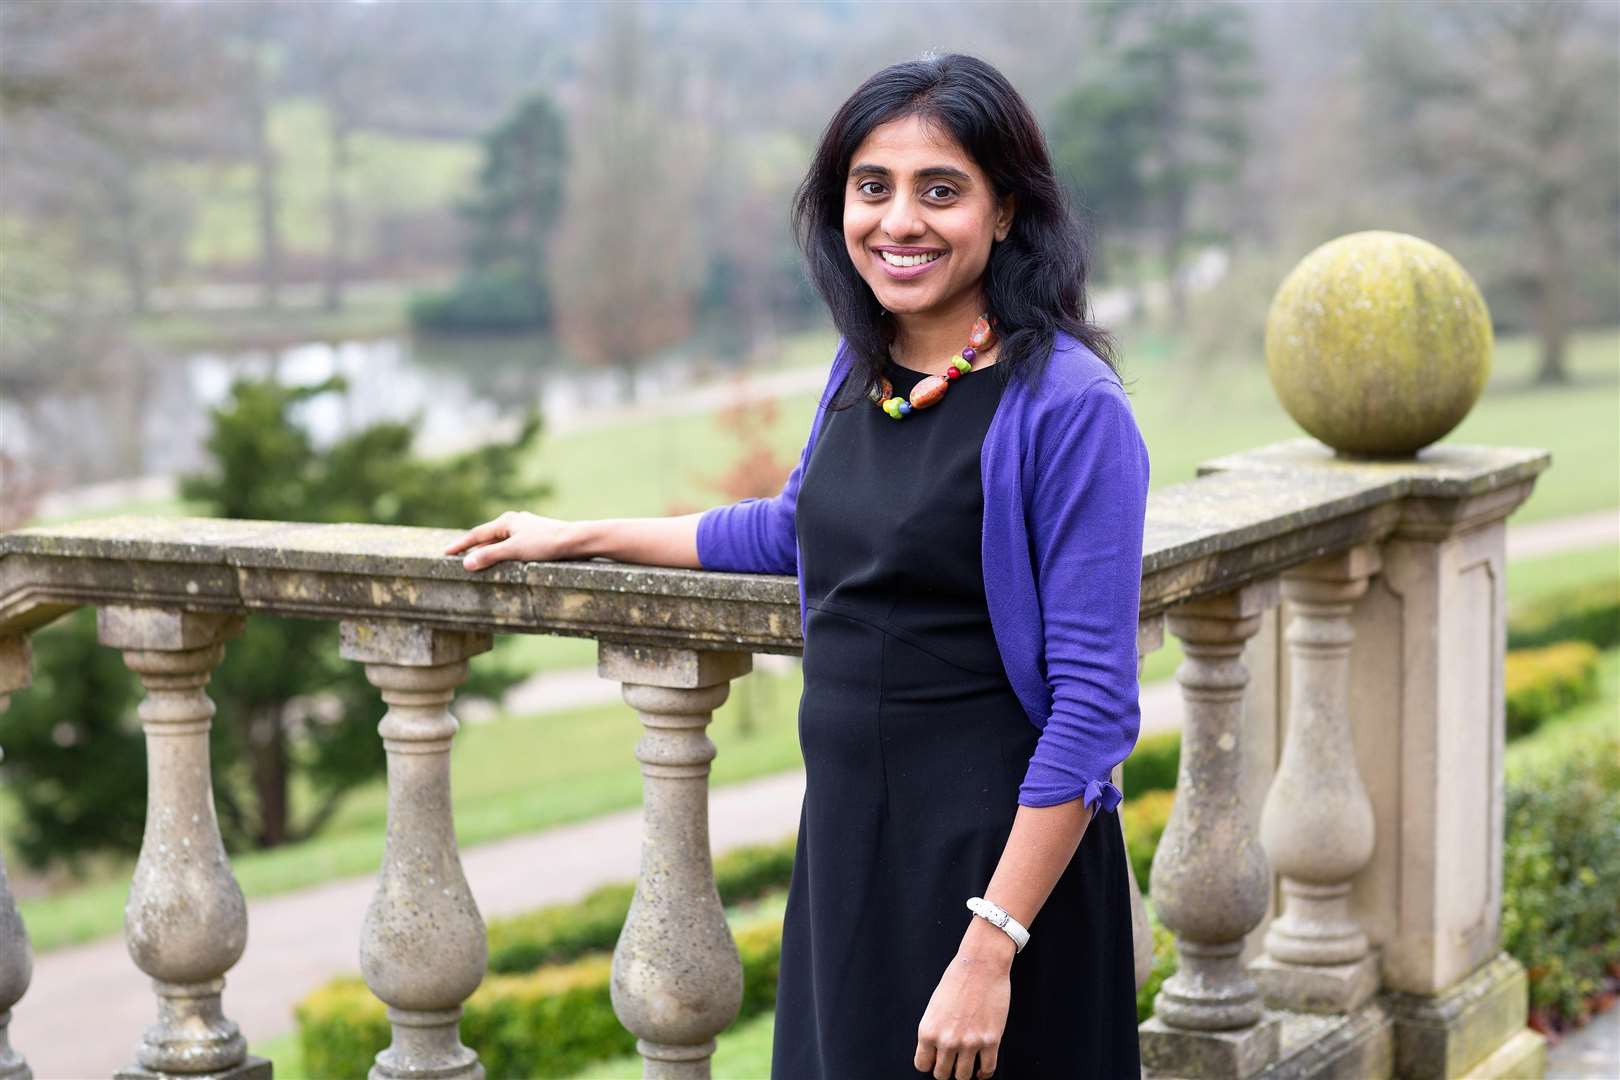 Sandhya Iyer has joined the board of the Sevenoaks Chamber of Commerce